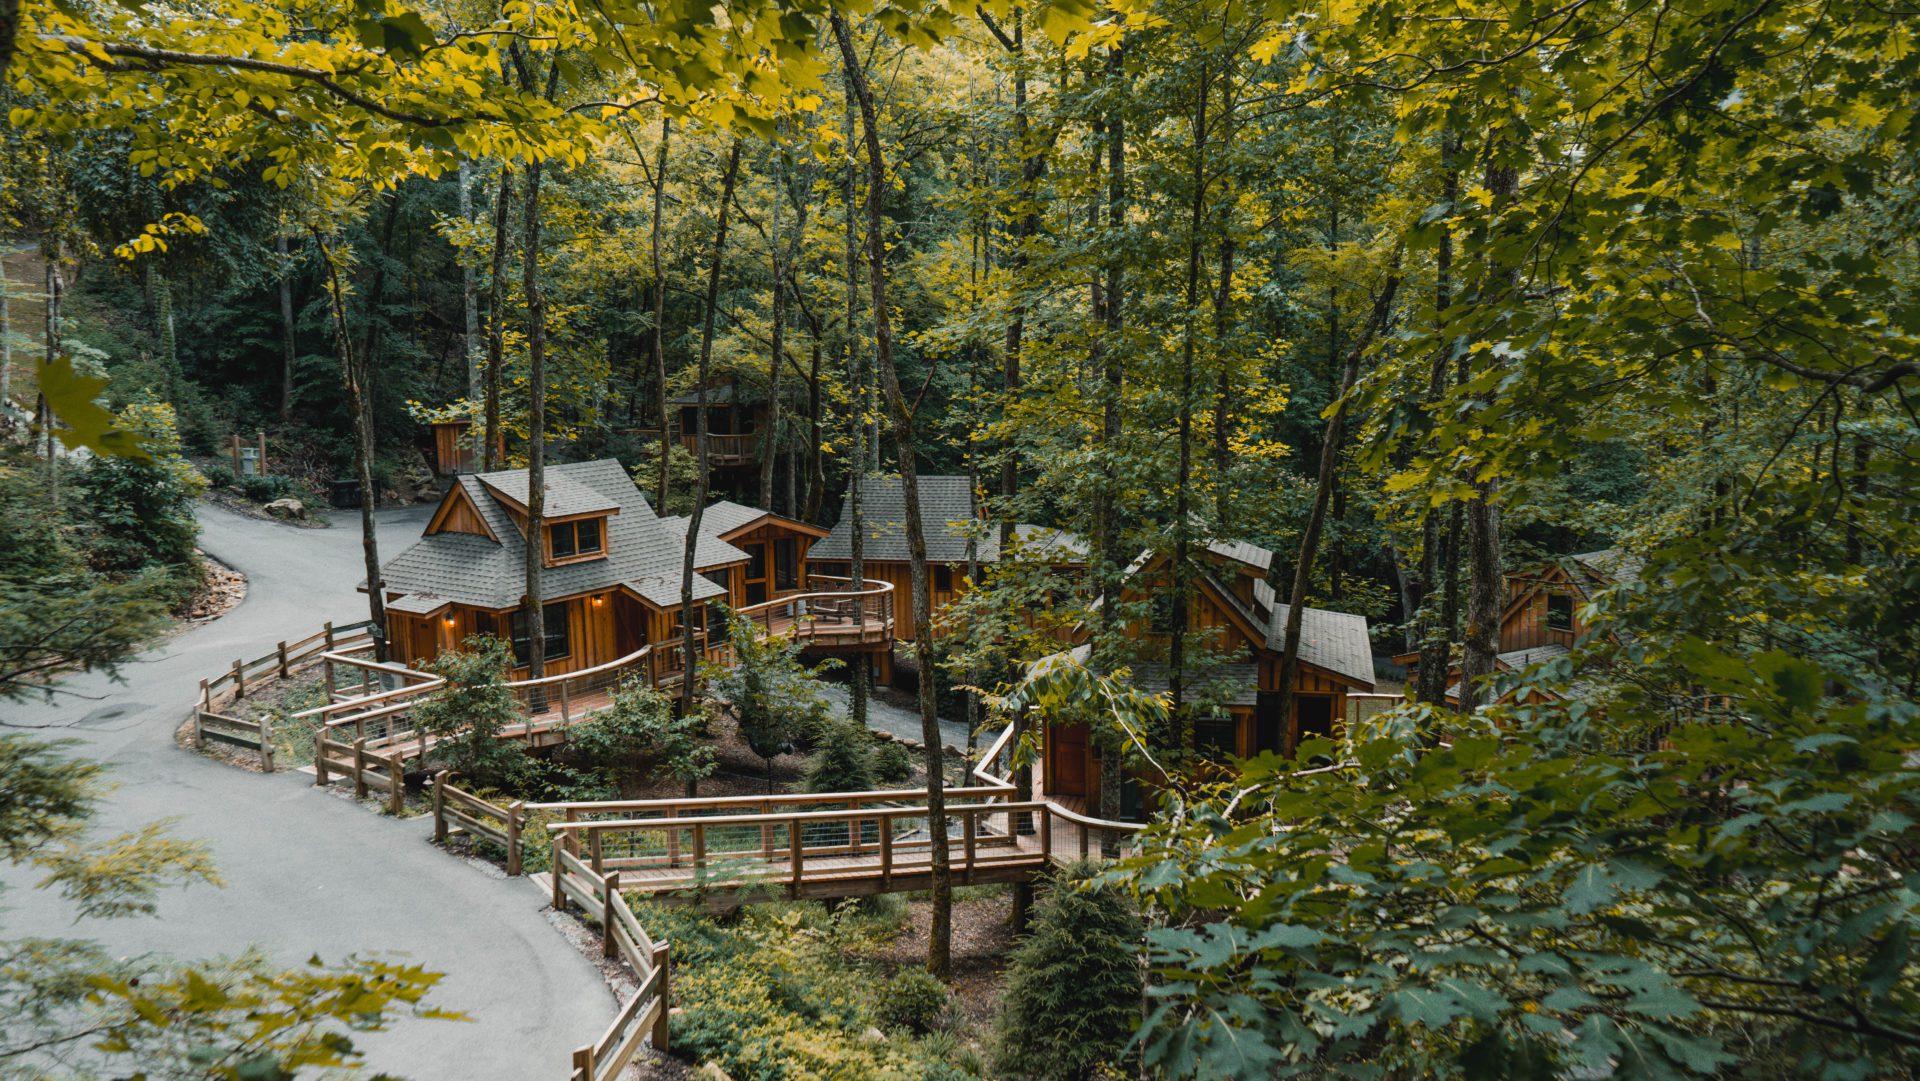 Discover Our “By the Creek” Treehouses in the Smoky Mountains